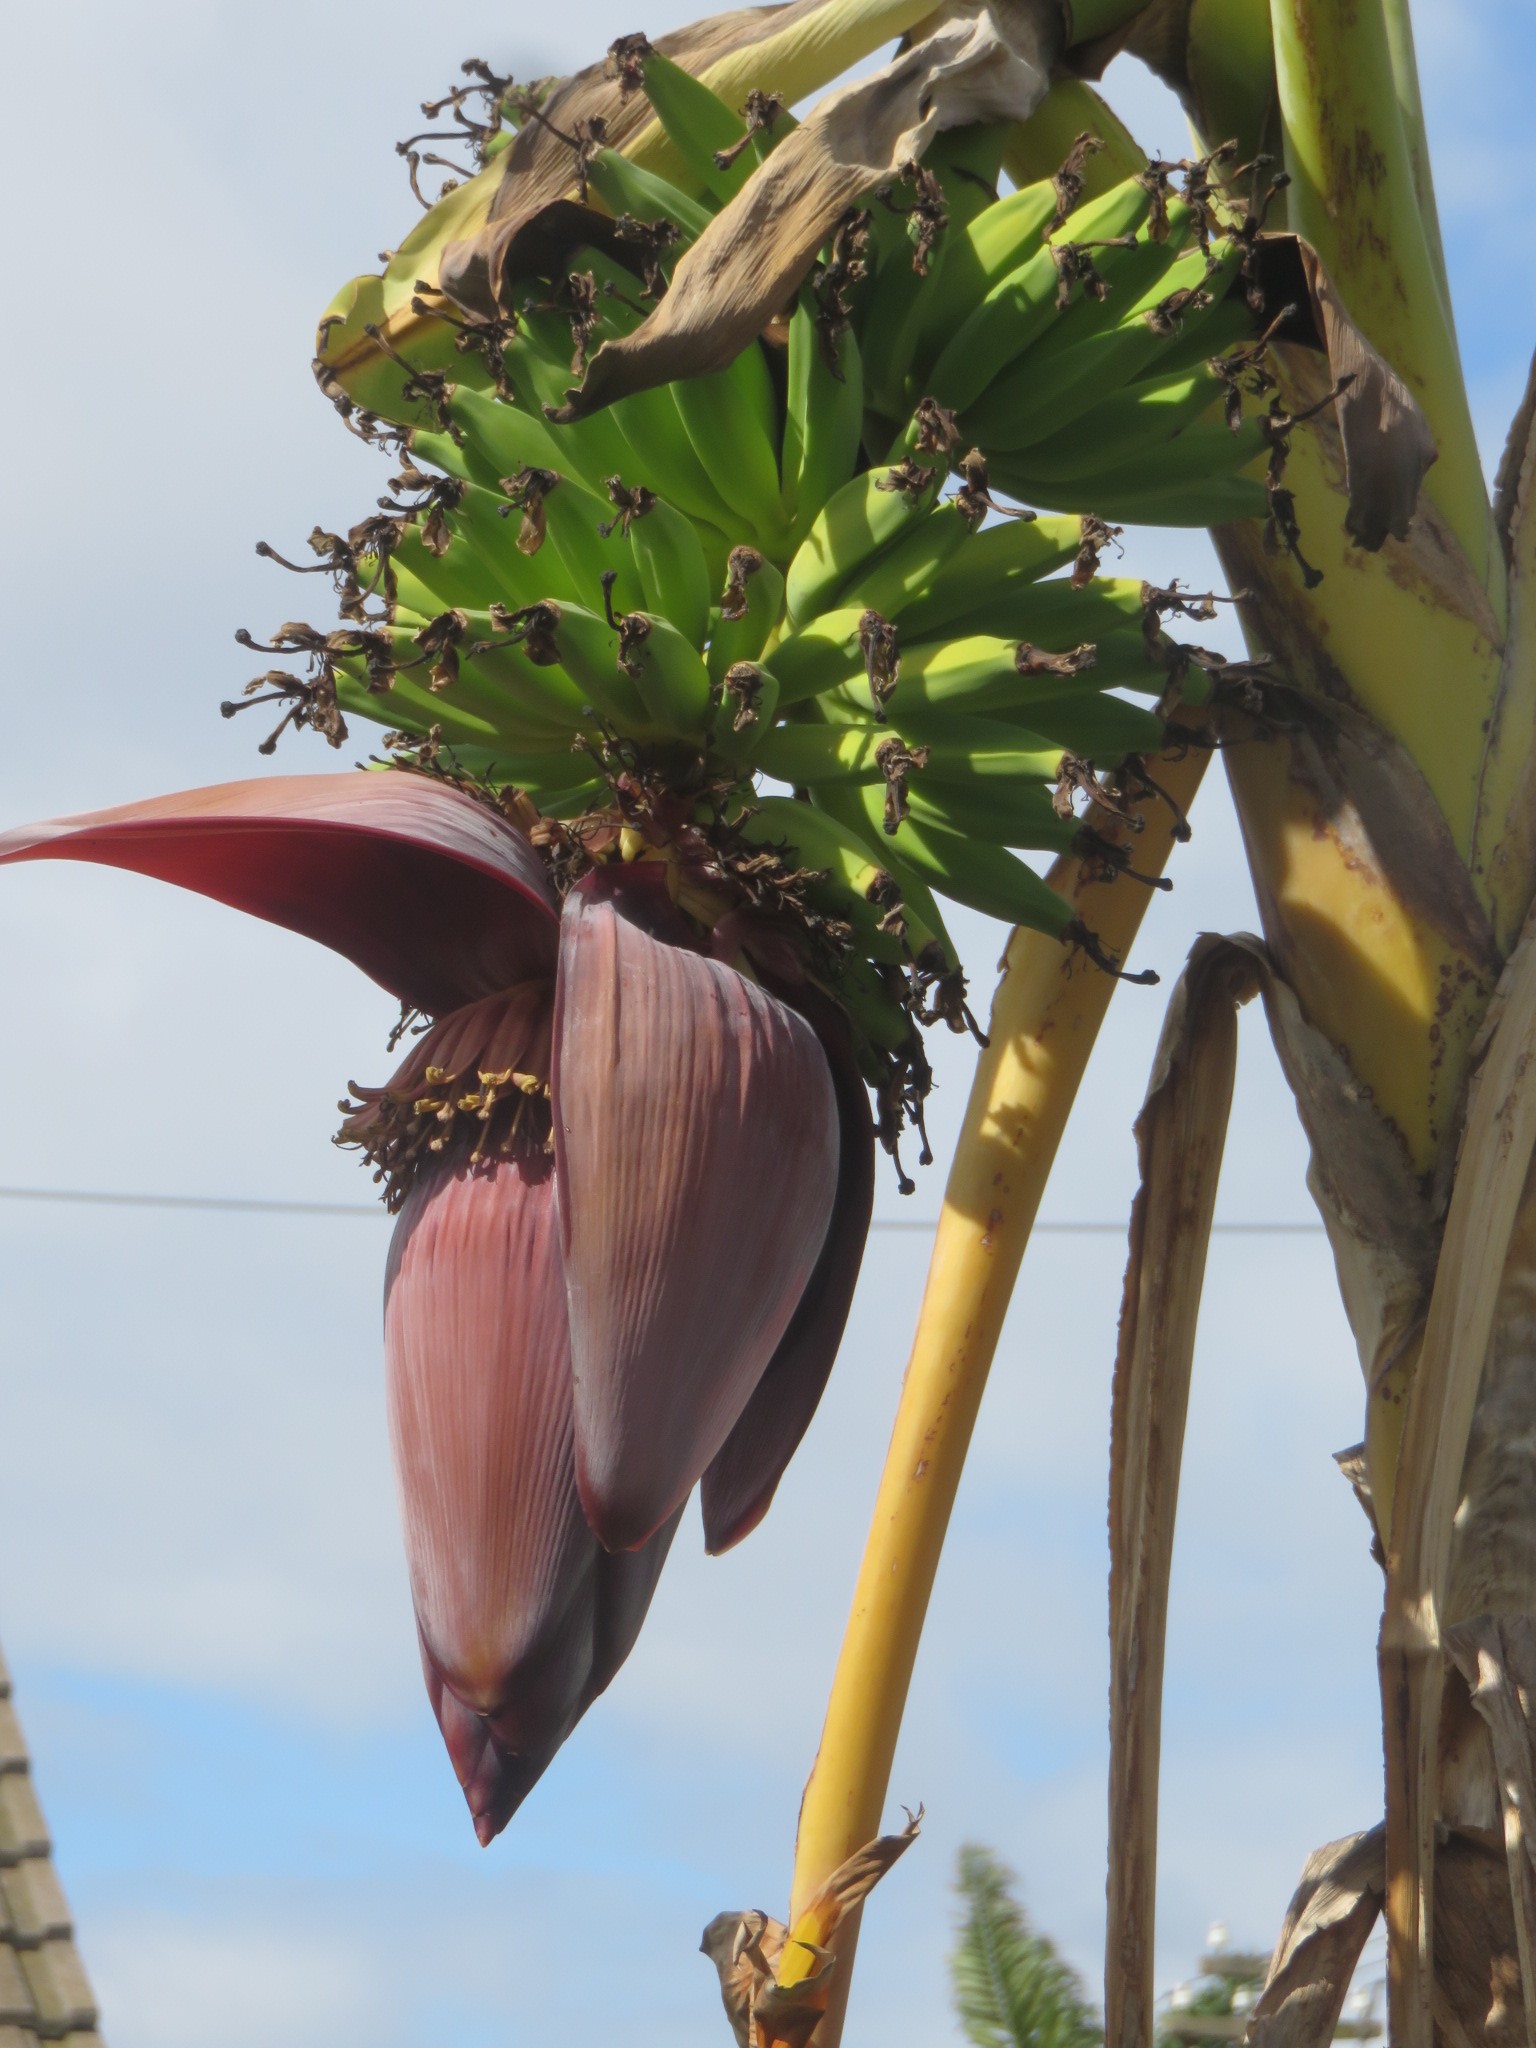 Trees such as bananas thrive on gray water